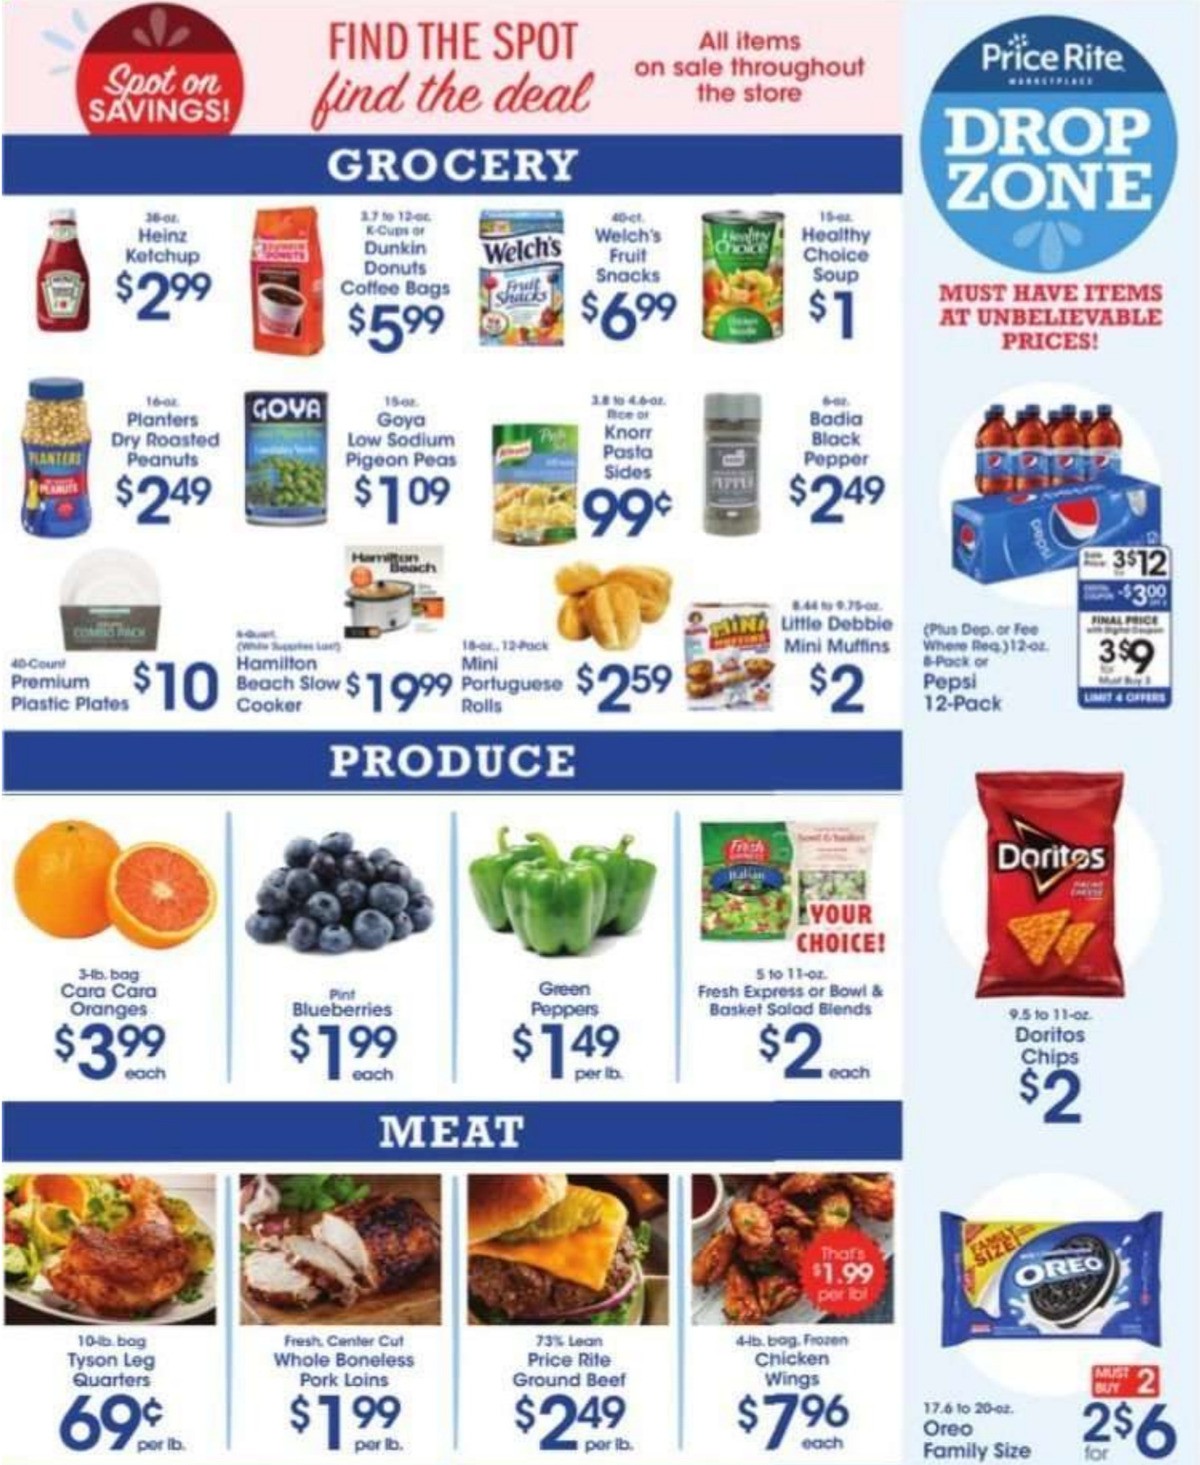 Price Rite Weekly Ad from January 15